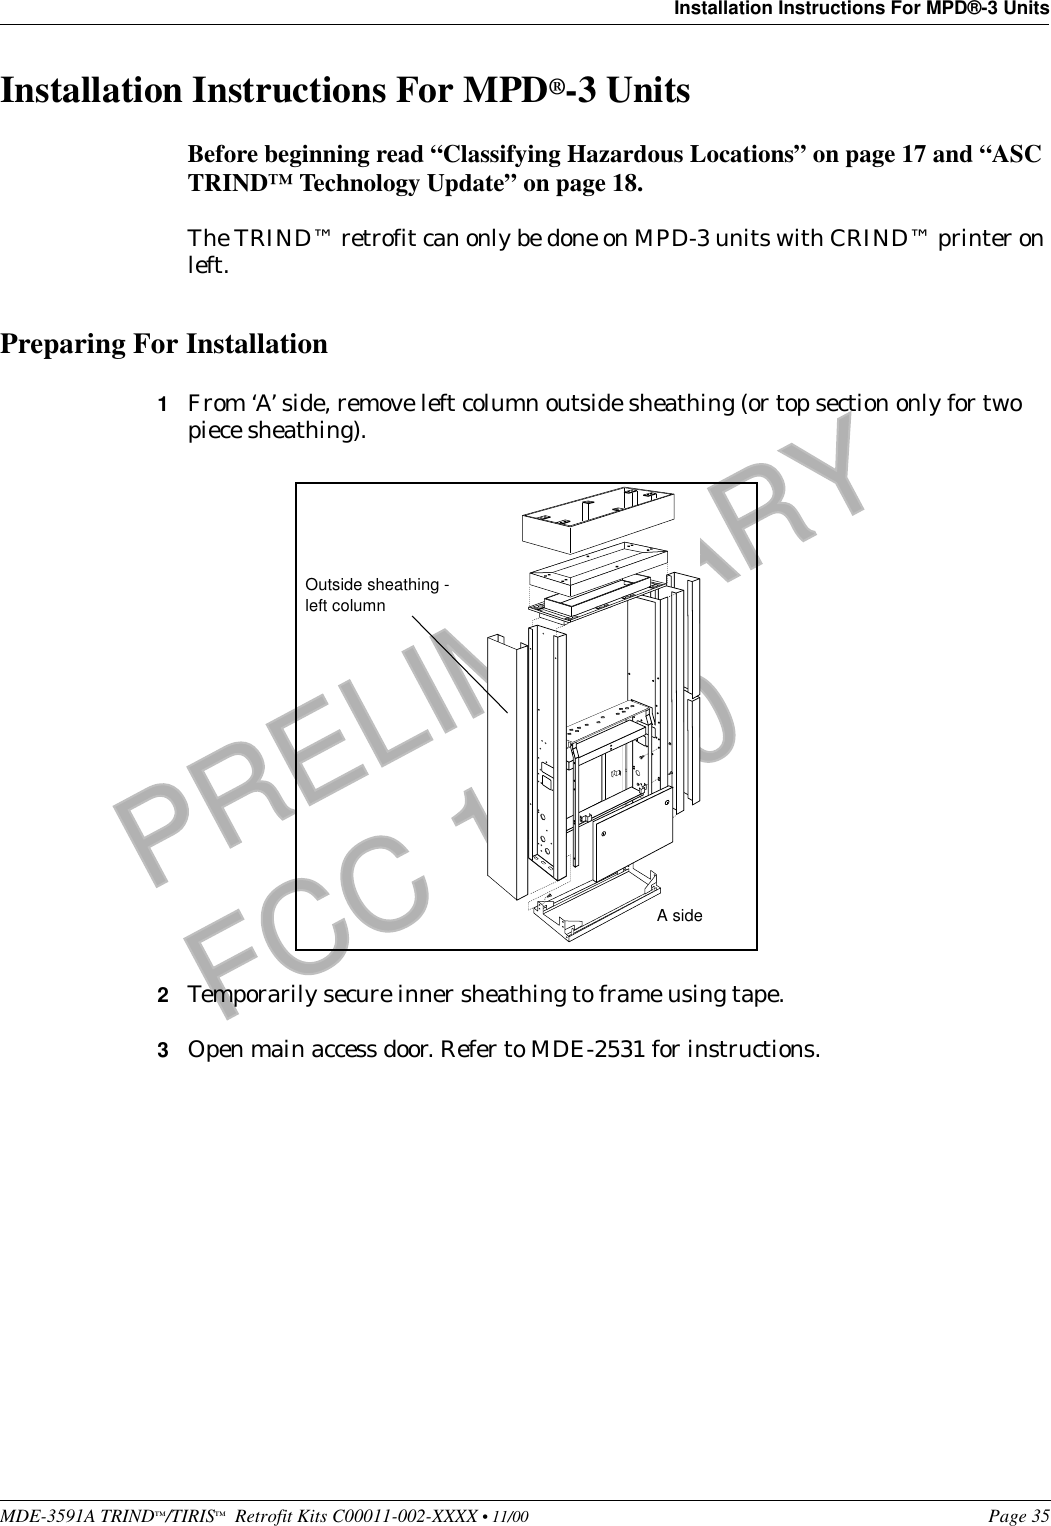 MDE-3591A TRIND™/TIRIS™  Retrofit Kits C00011-002-XXXX • 11/00 Page 35Installation Instructions For MPD®-3 UnitsPRELIMINARYFCC 11/30Installation Instructions For MPD®-3 UnitsBefore beginning read “Classifying Hazardous Locations” on page 17 and “ASC TRIND™ Technology Update” on page 18.The TRIND™ retrofit can only be done on MPD-3 units with CRIND™ printer on left.Preparing For Installation1From ‘A’ side, remove left column outside sheathing (or top section only for two piece sheathing).2Temporarily secure inner sheathing to frame using tape. 3Open main access door. Refer to MDE-2531 for instructions.Outside sheathing - left columnA side